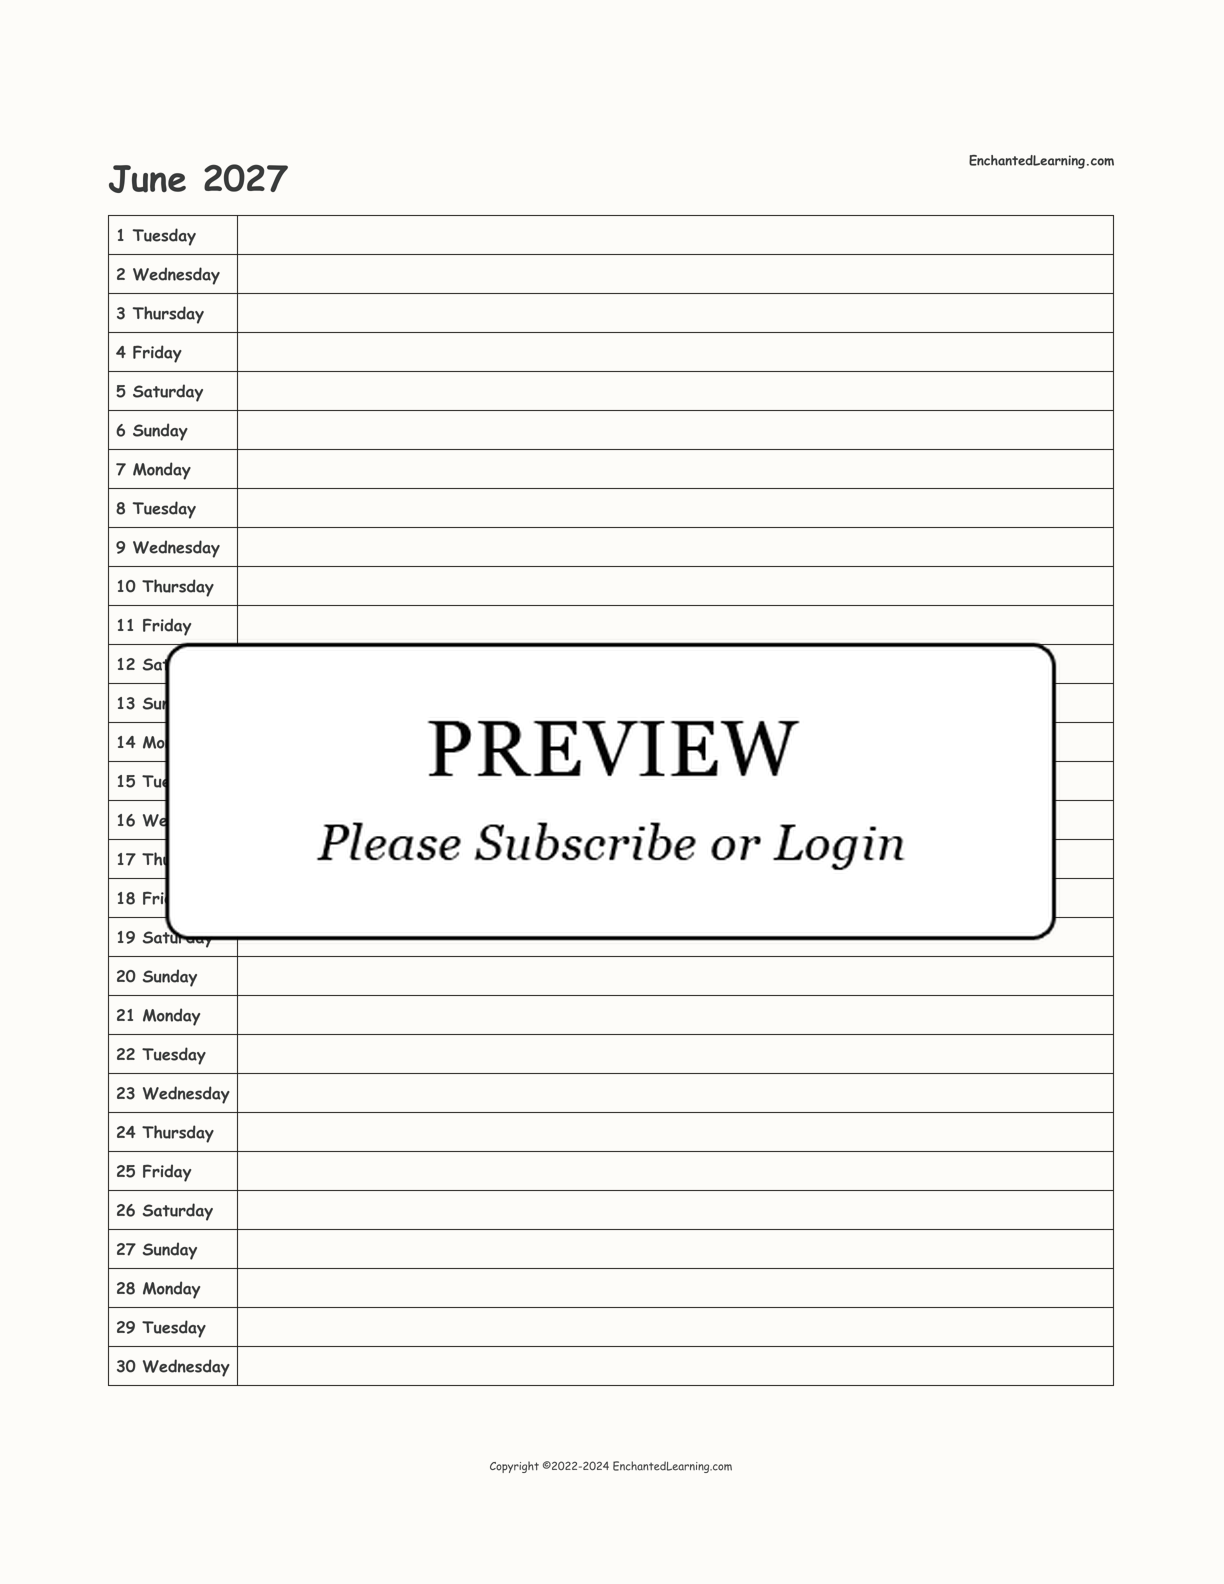 2027 Scheduling Calendar interactive printout page 6